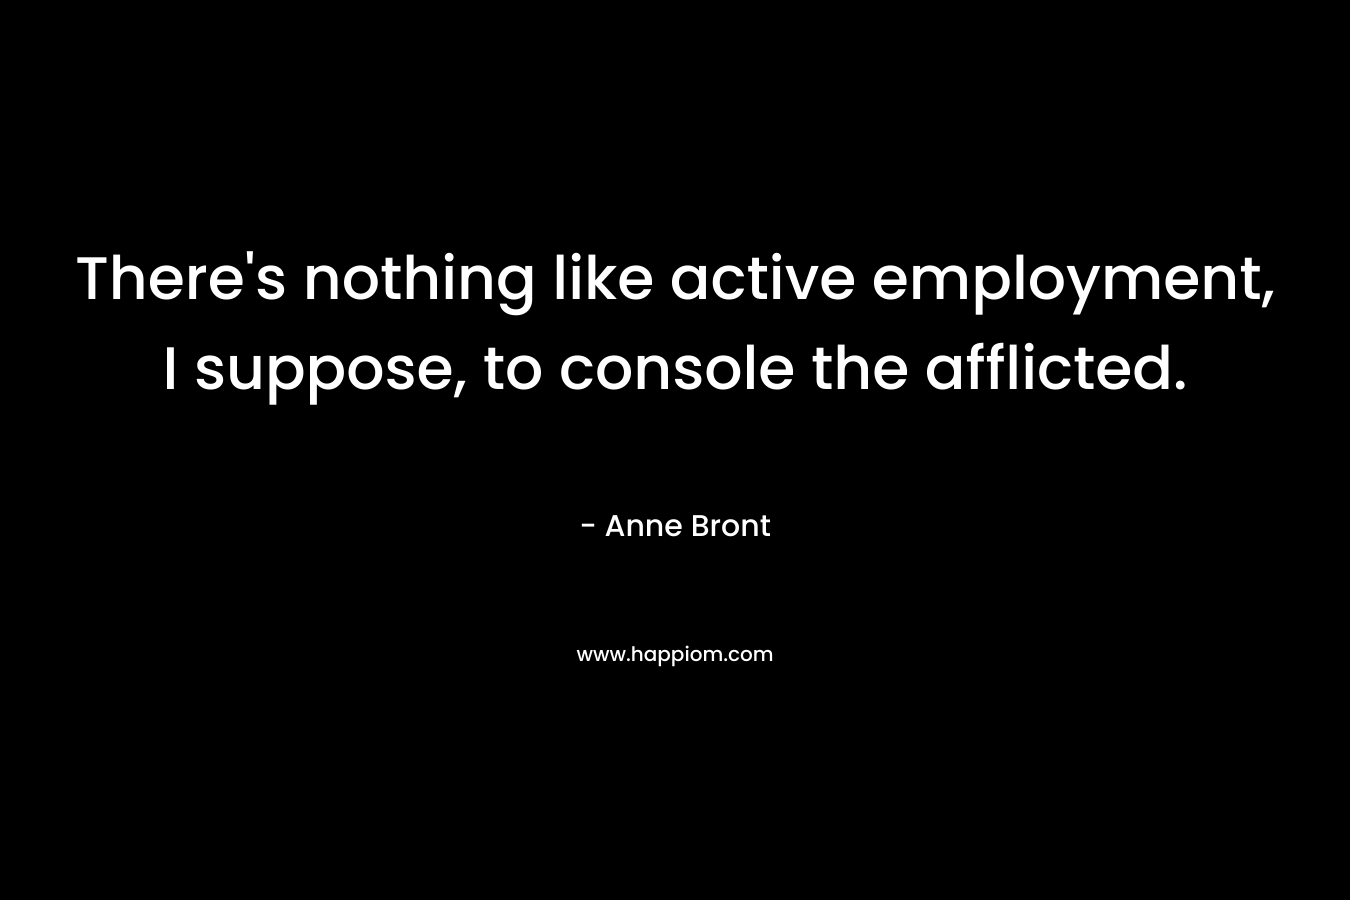 There’s nothing like active employment, I suppose, to console the afflicted. – Anne Bront